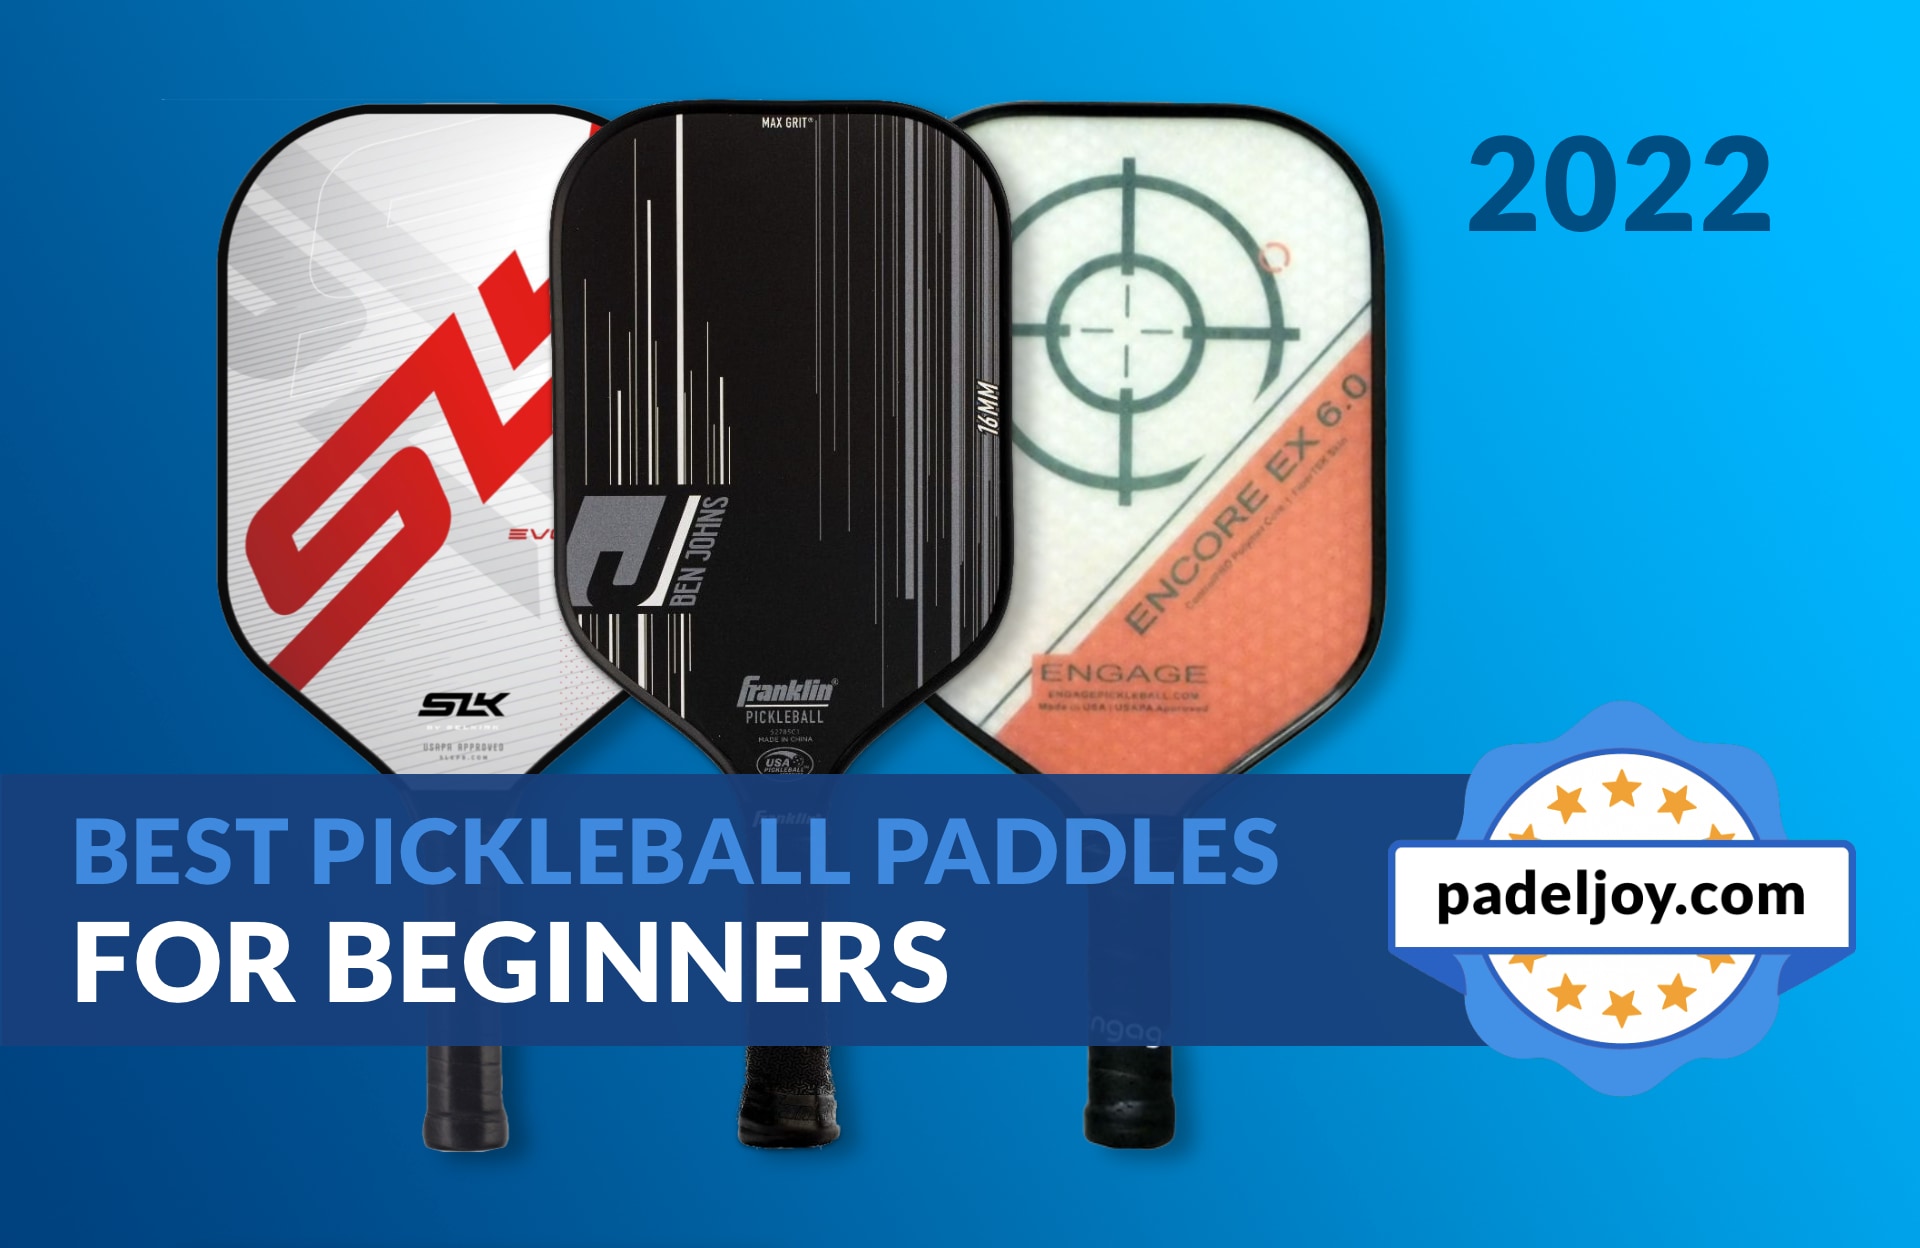 Best Pickleball Paddles for Beginners: Top 5 for New Players (2022)